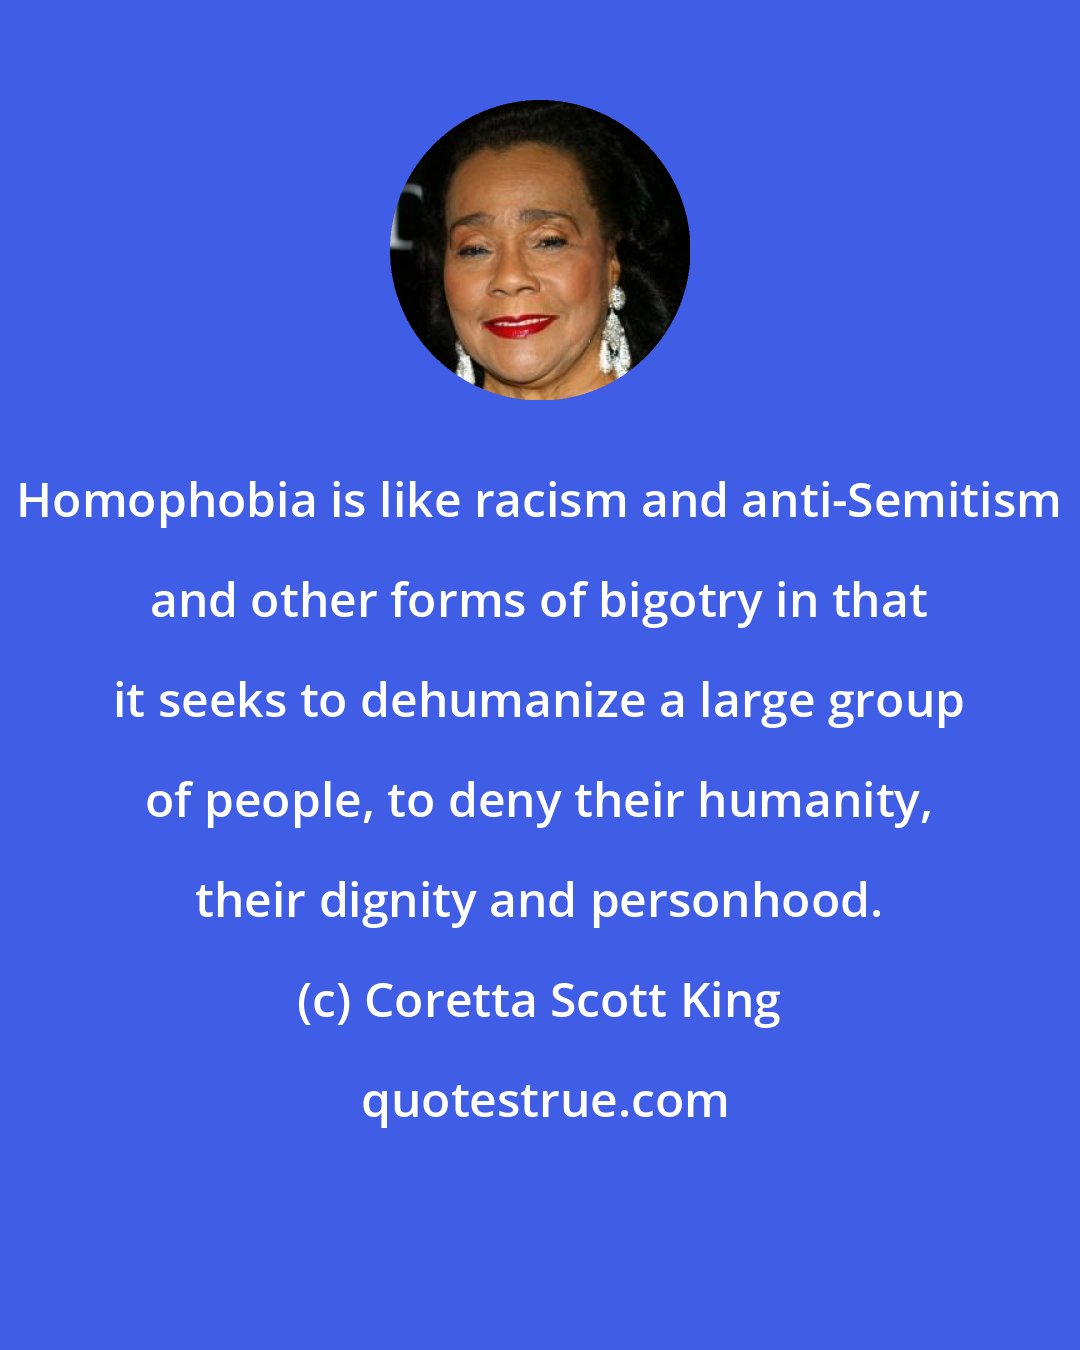 Coretta Scott King: Homophobia is like racism and anti-Semitism and other forms of bigotry in that it seeks to dehumanize a large group of people, to deny their humanity, their dignity and personhood.